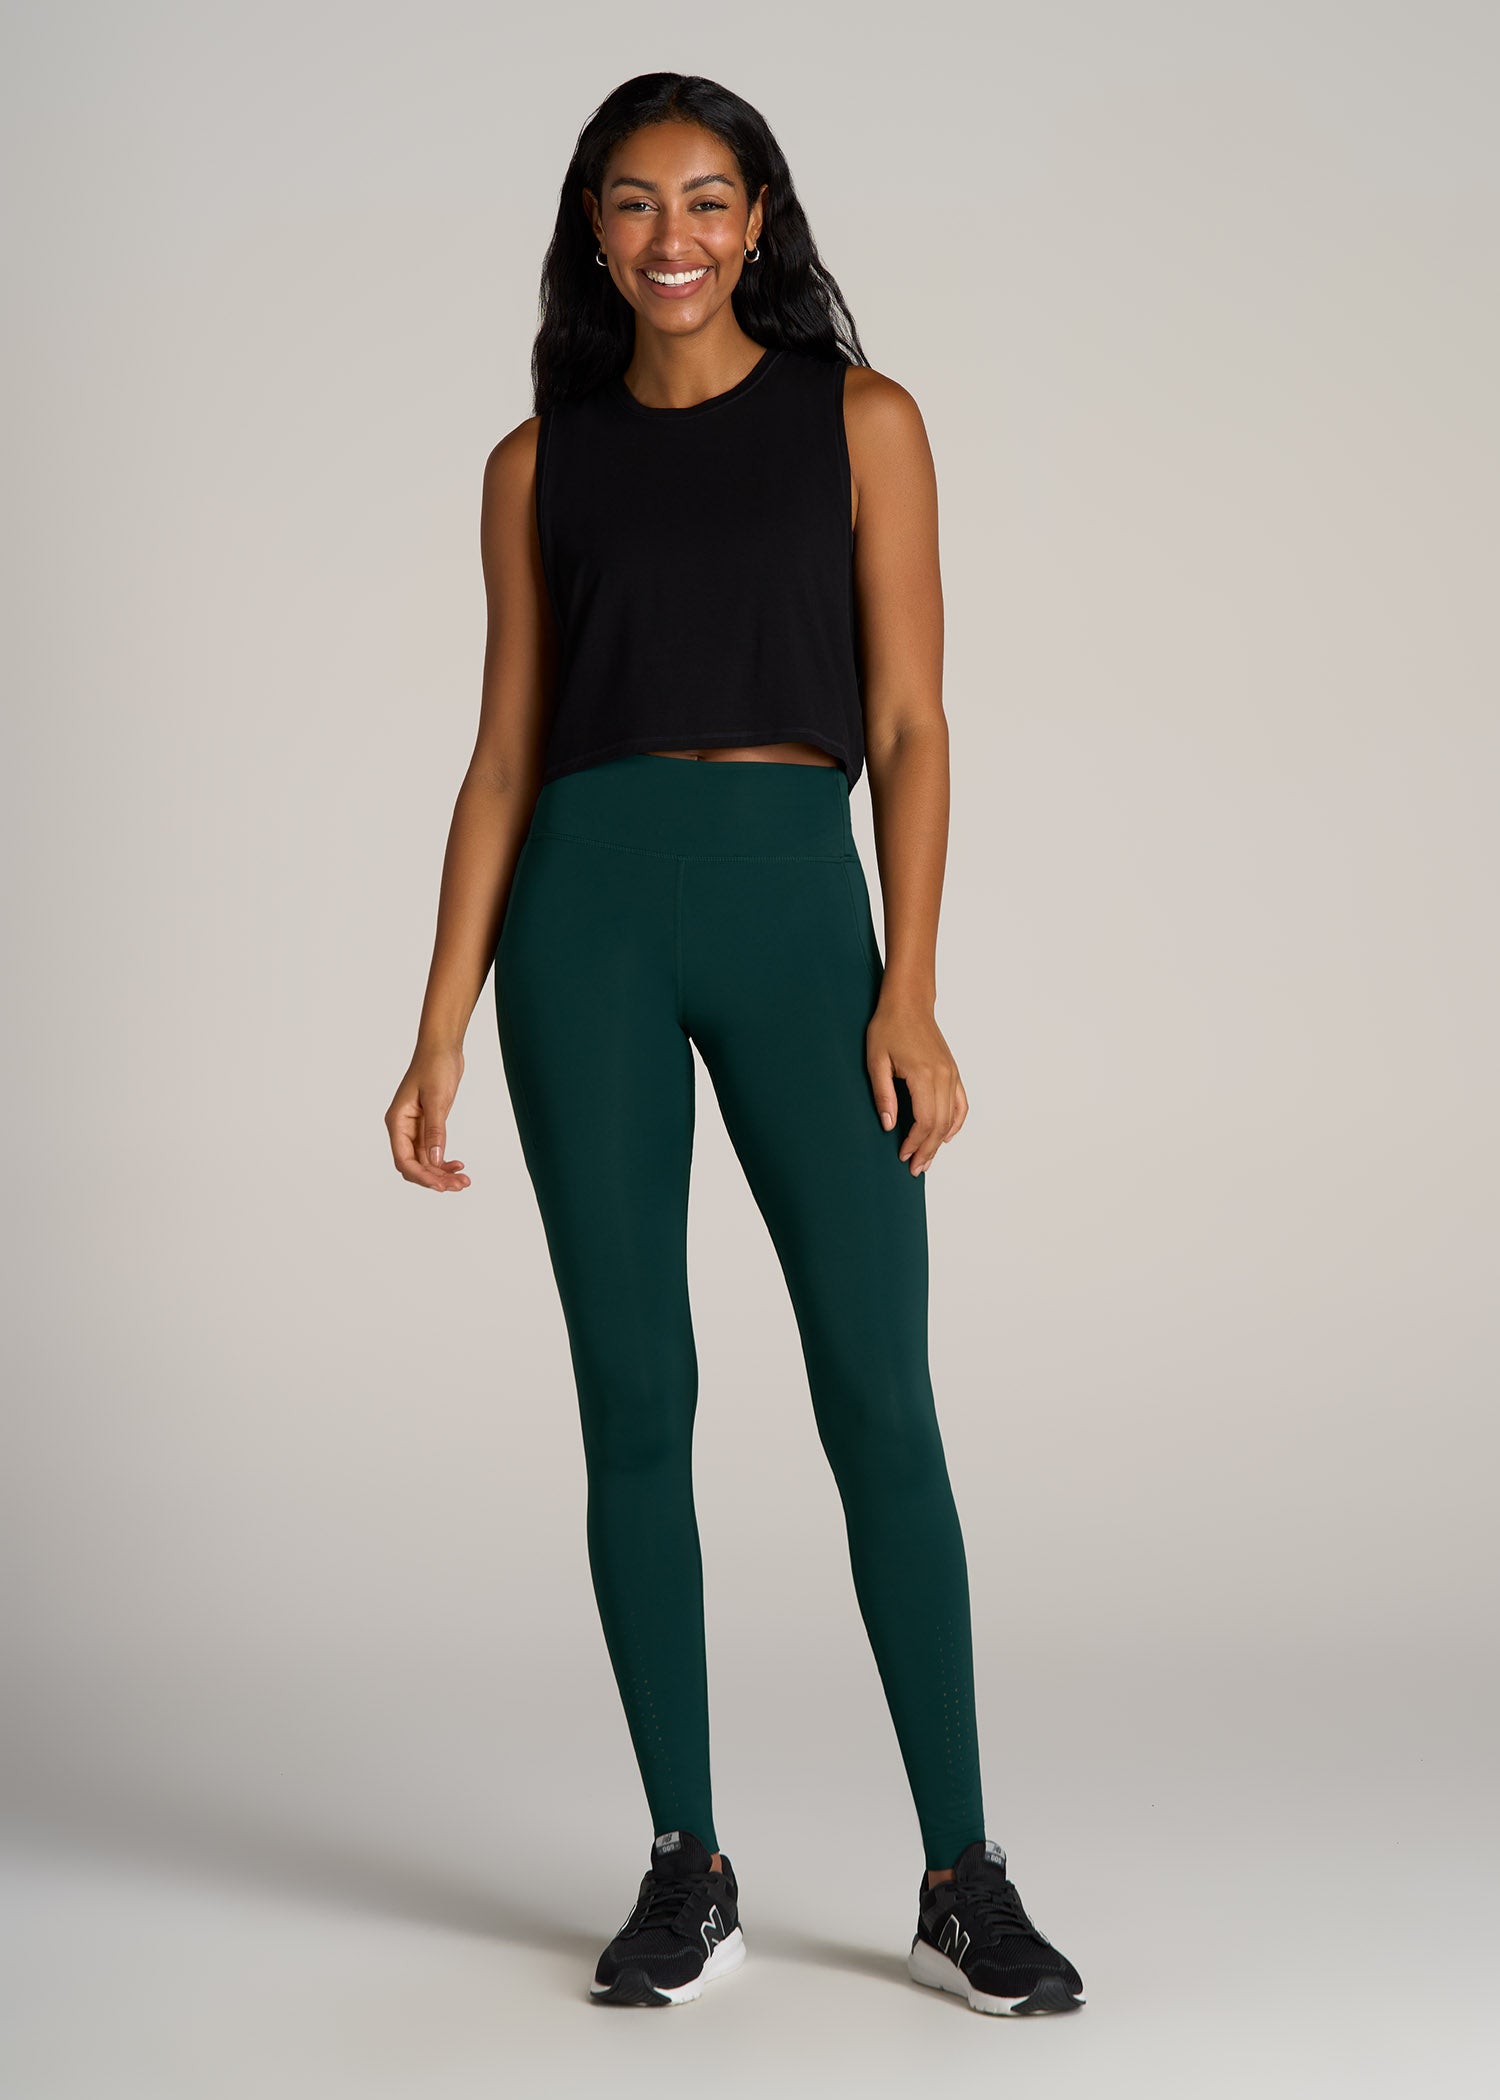 Let's Stay Home High Waisted Leggings (Black) *FINAL SALE* – Candy